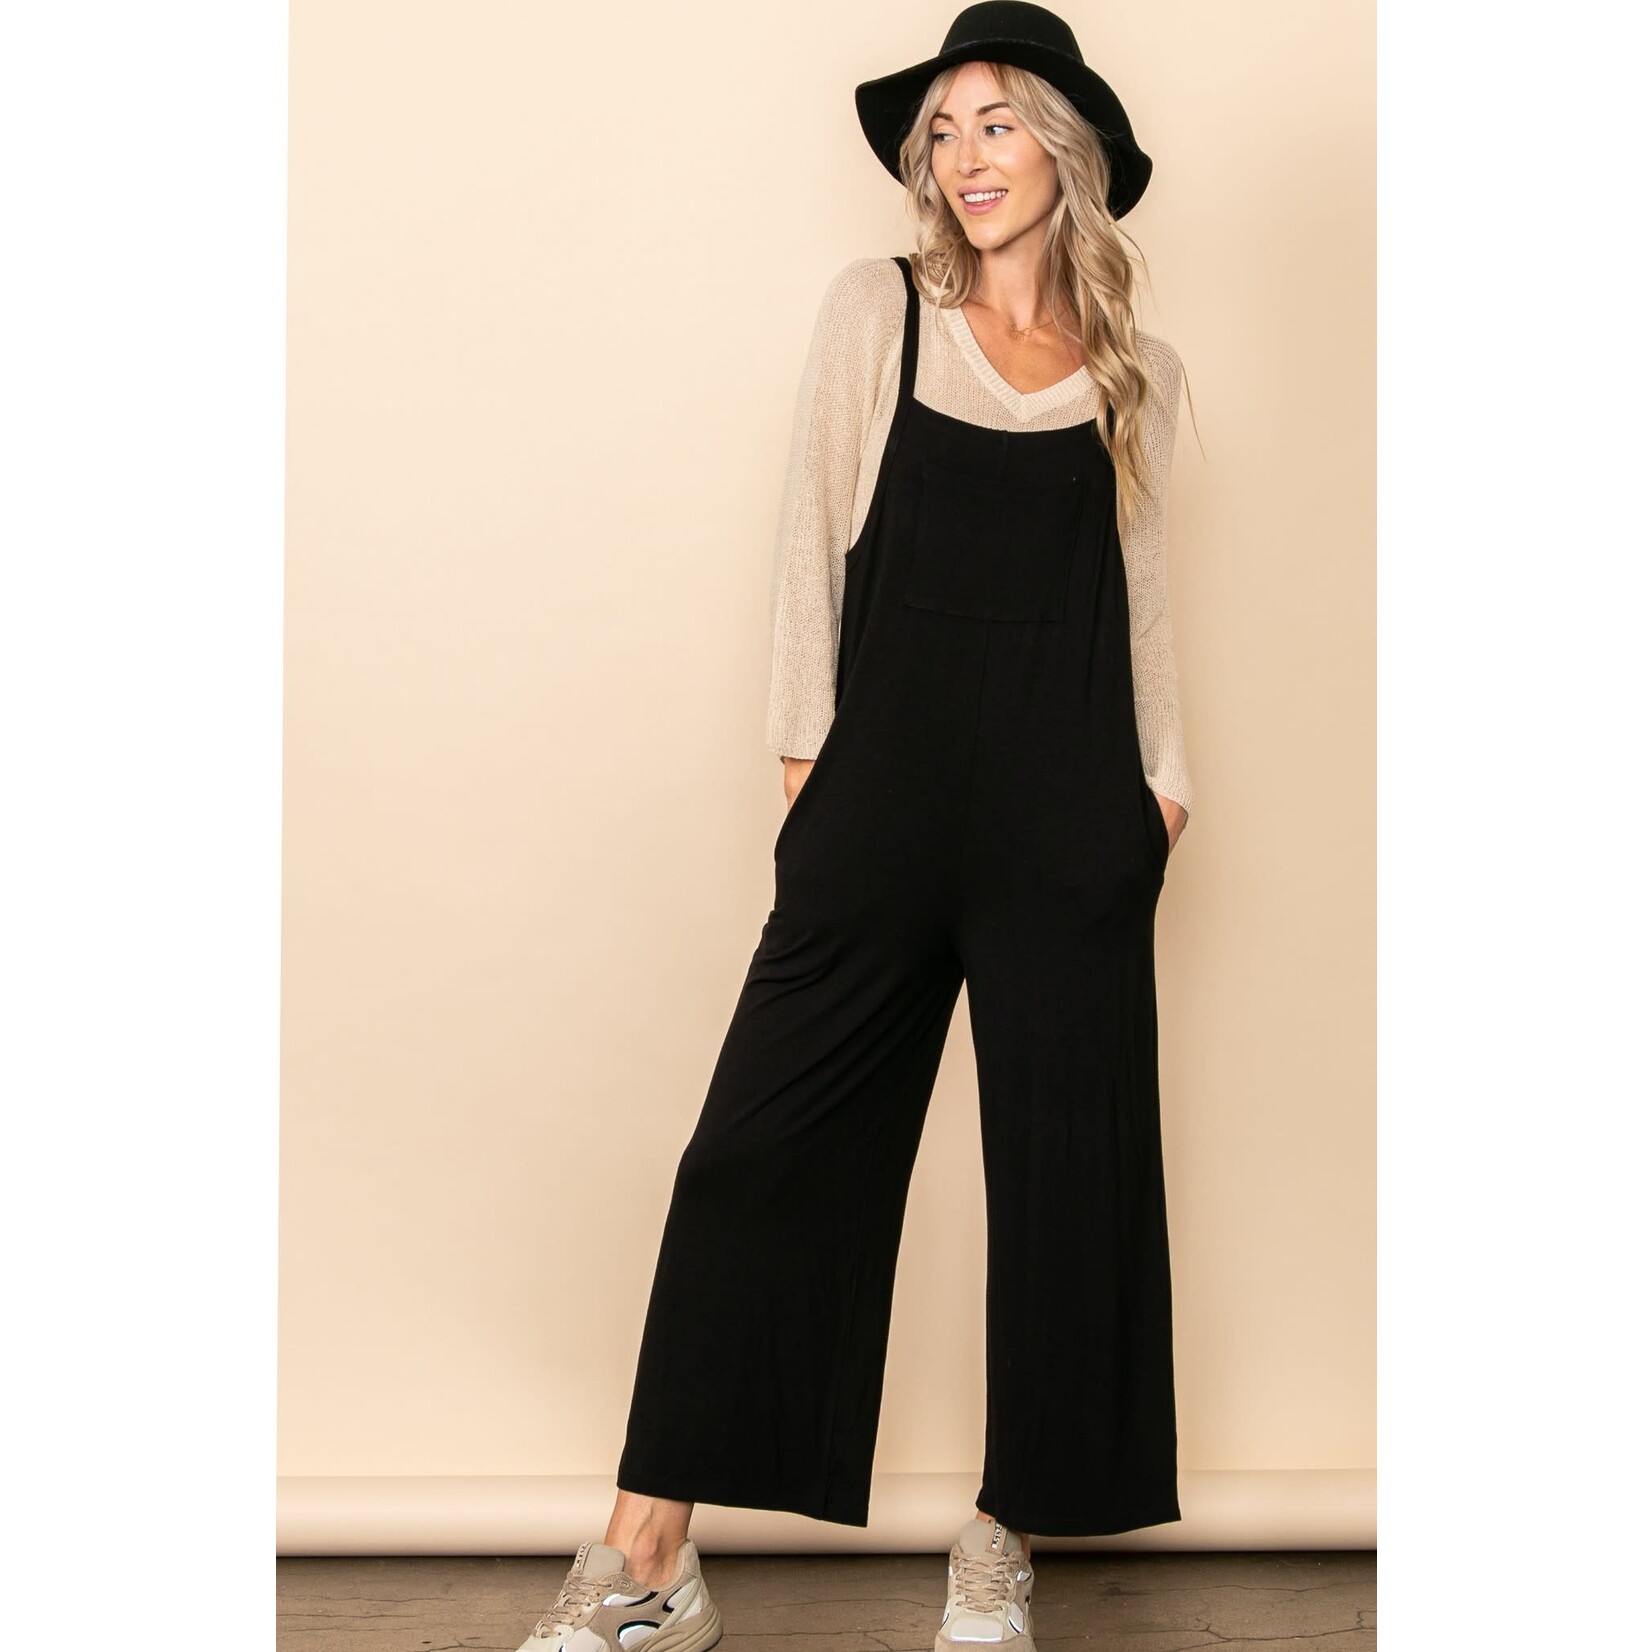 Elloh POCKET DETAILED MODAL OVERALL JUMPSUIT MADE IN USA